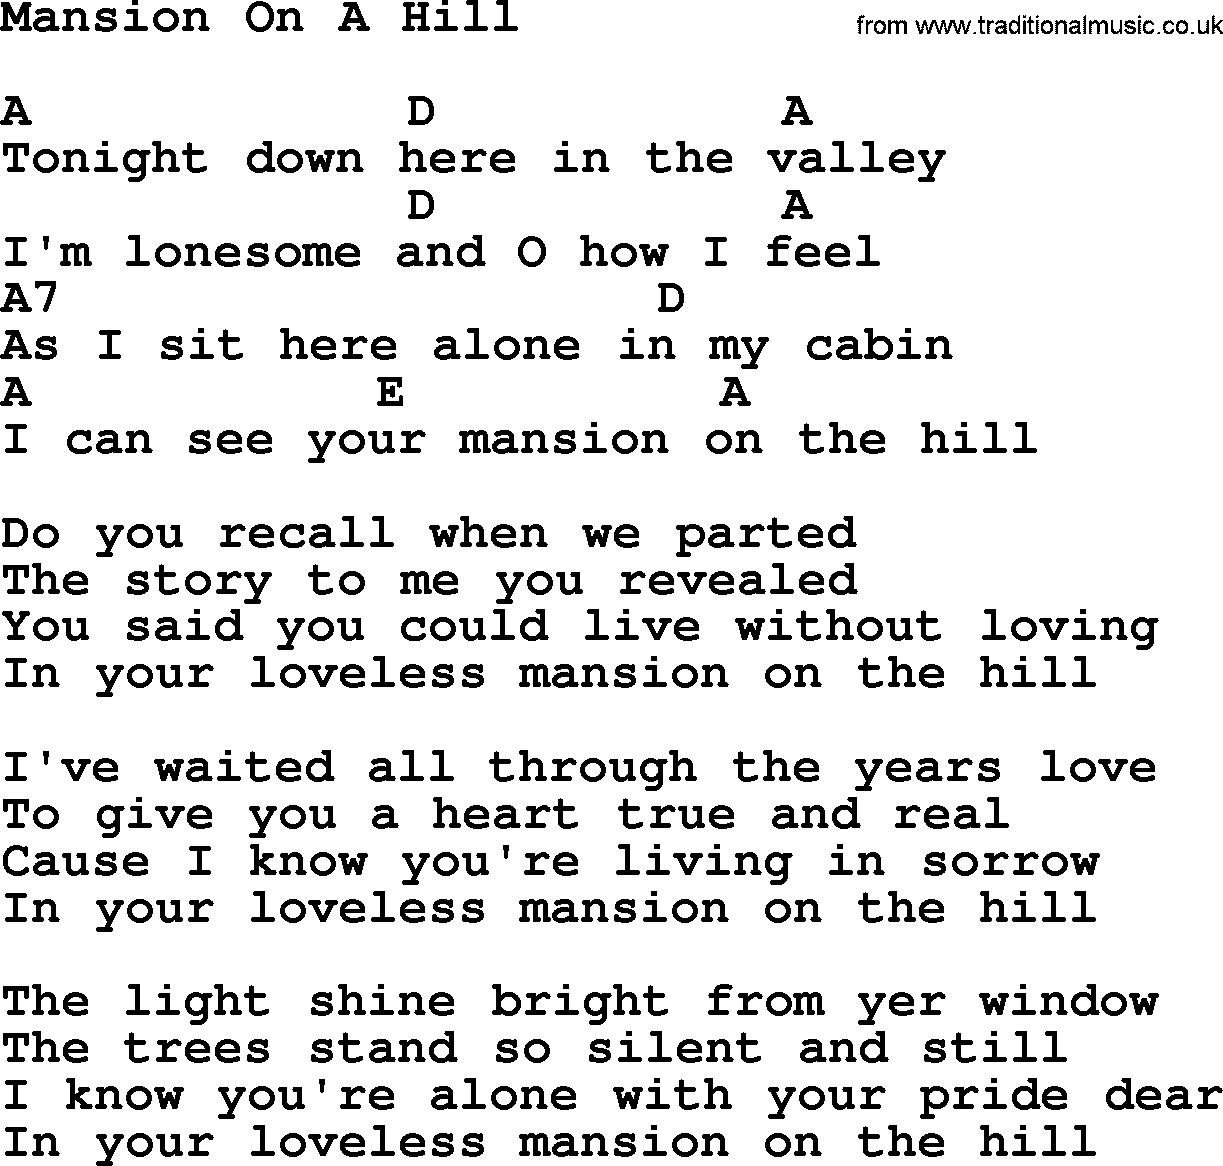 Hank Williams song Mansion On A Hill, lyrics and chords